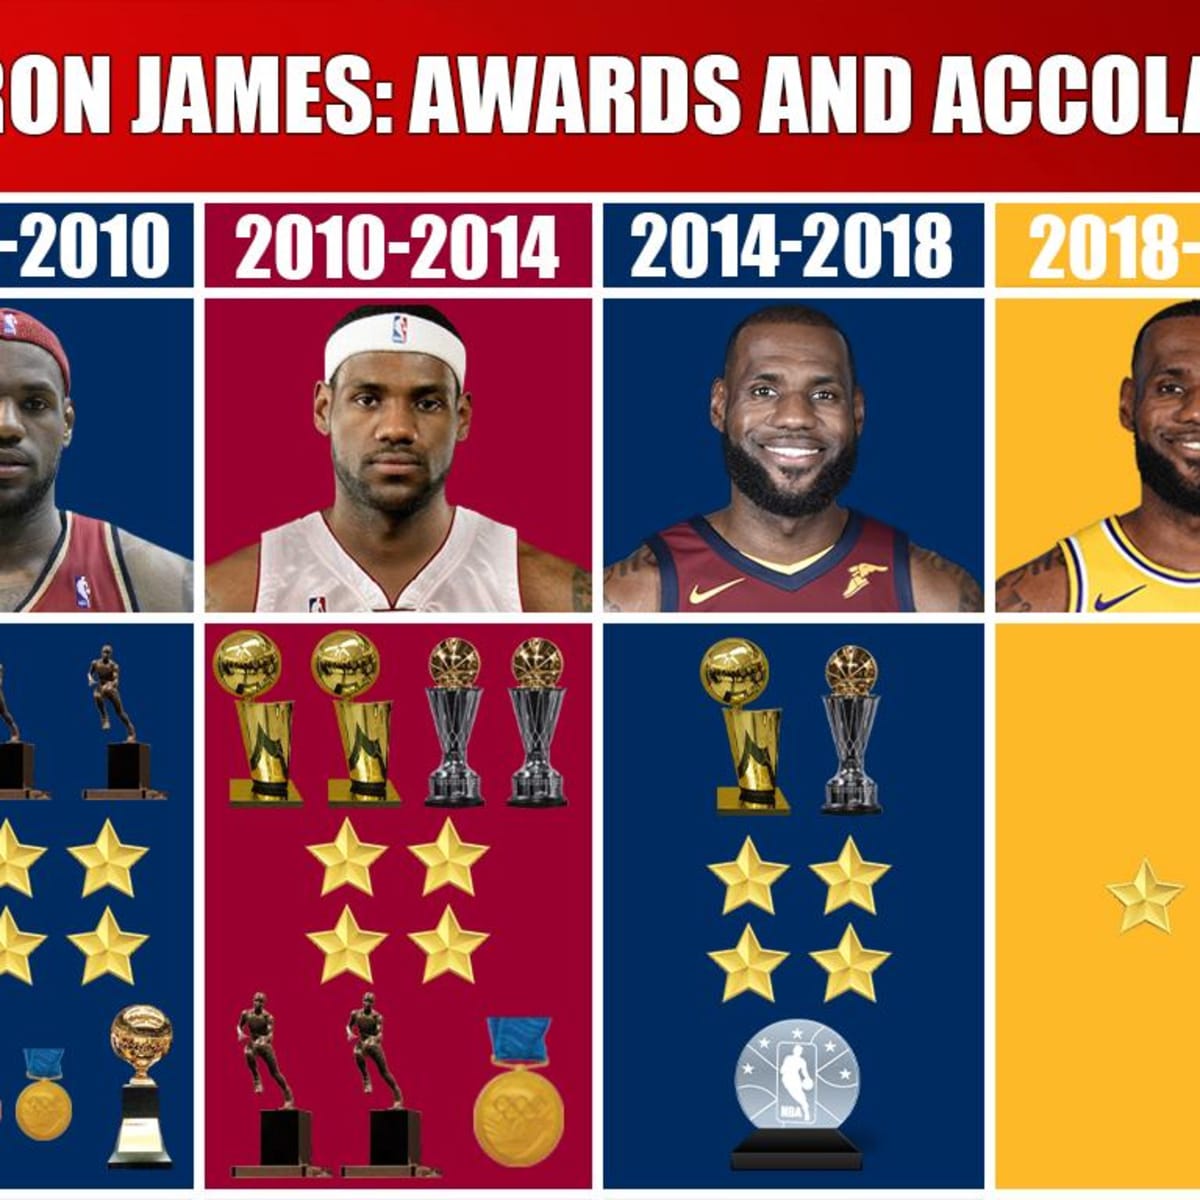 LeBron James: Career stats, records, awards and medals of US